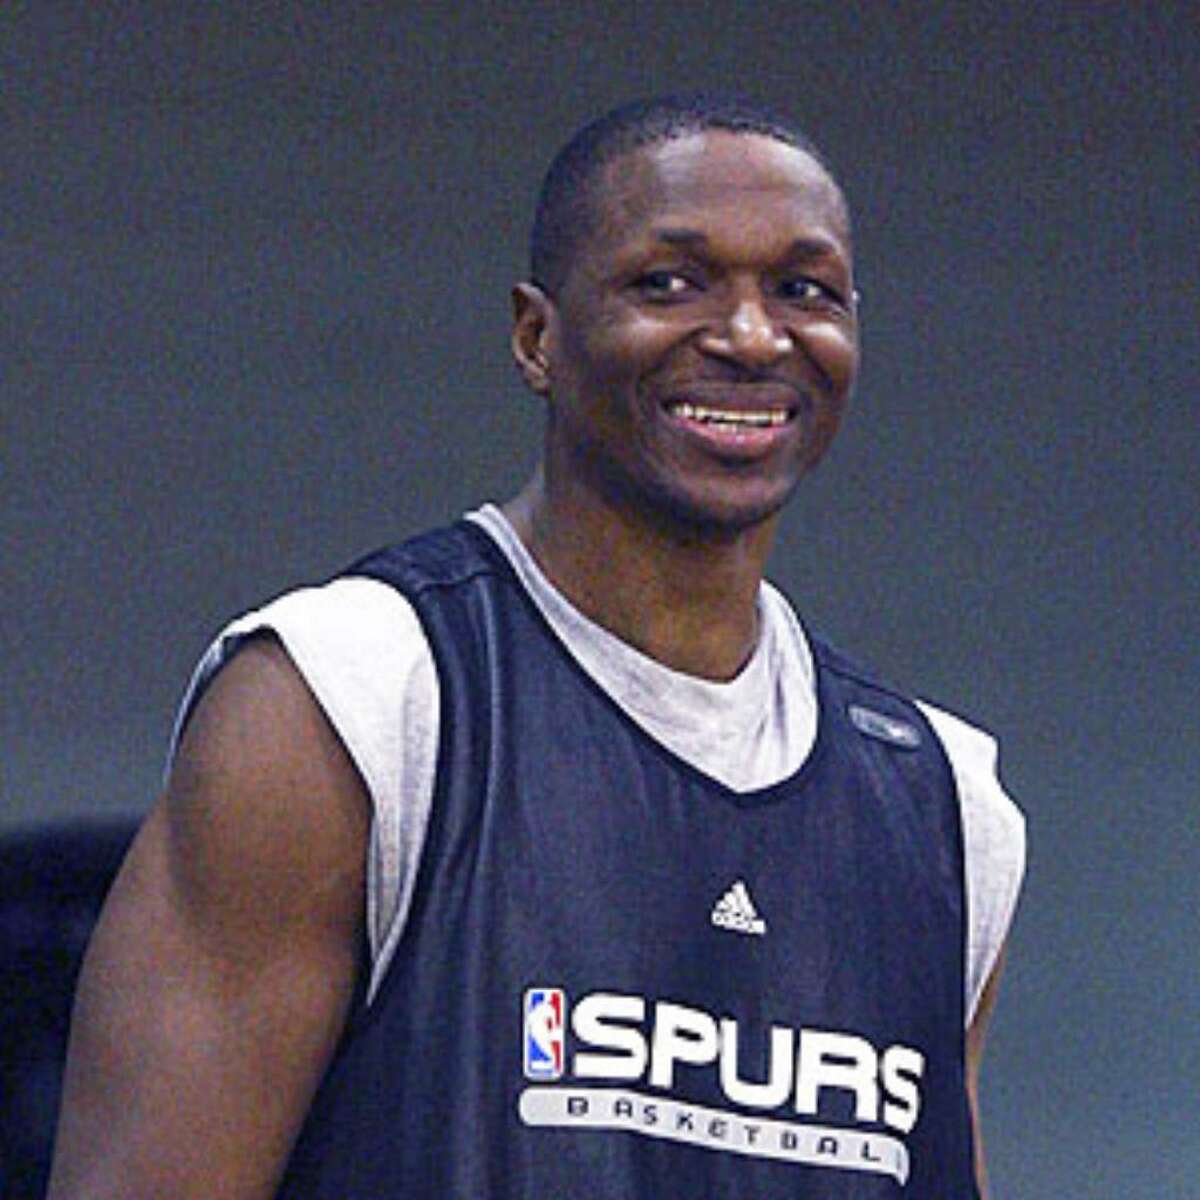 New Spurs center Theo Ratliff averages 7.5 points and 5.9 rebounds in 751 career games.